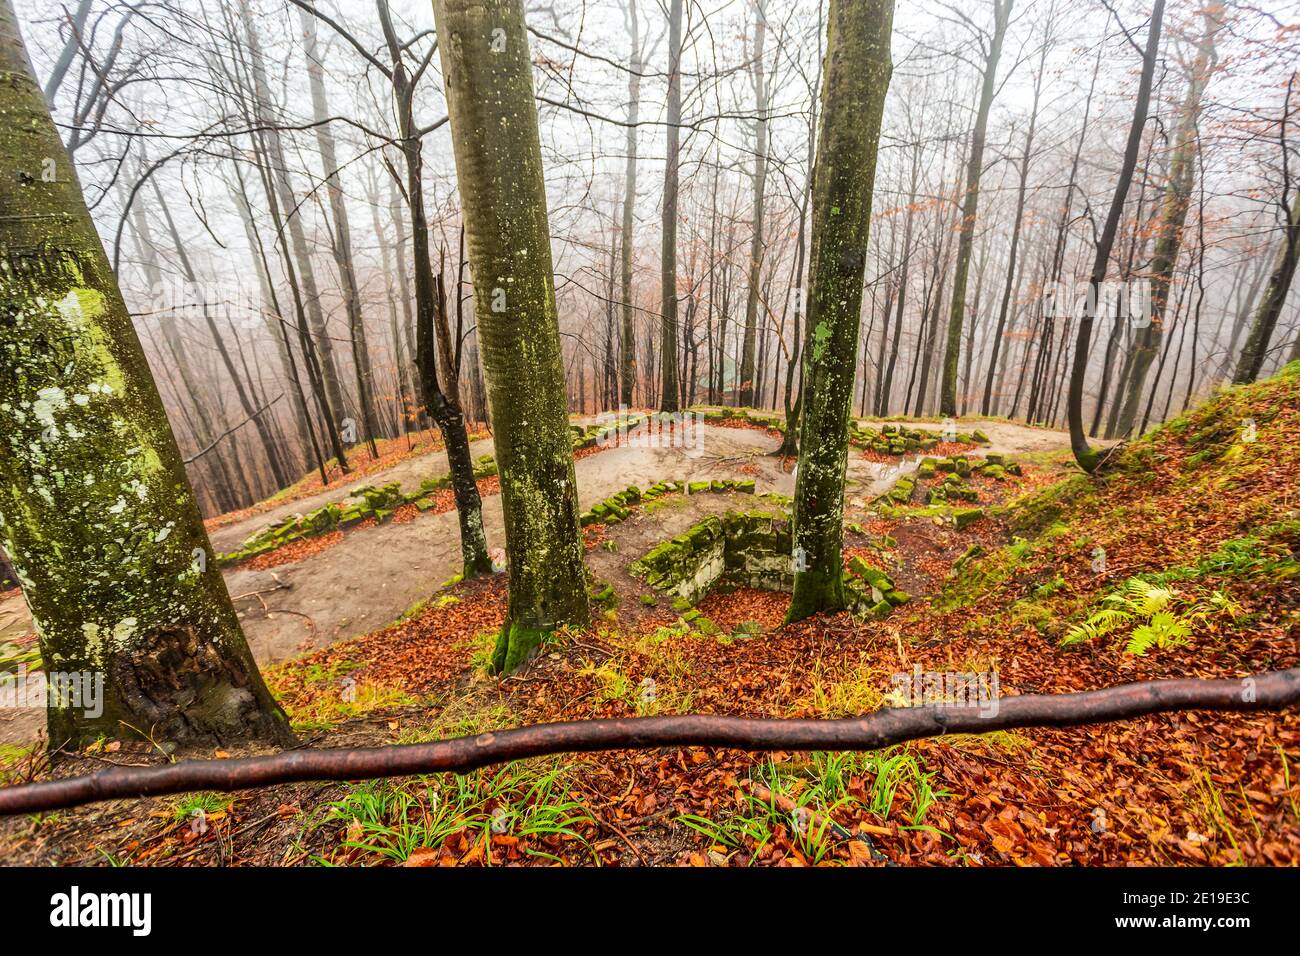 Mystical ancient forest ruins. Photo taken on 30th of November 2019 in the ancient forests around Sarmizegetuza Regia (the ex-capital of Dacia), Huned Stock Photo